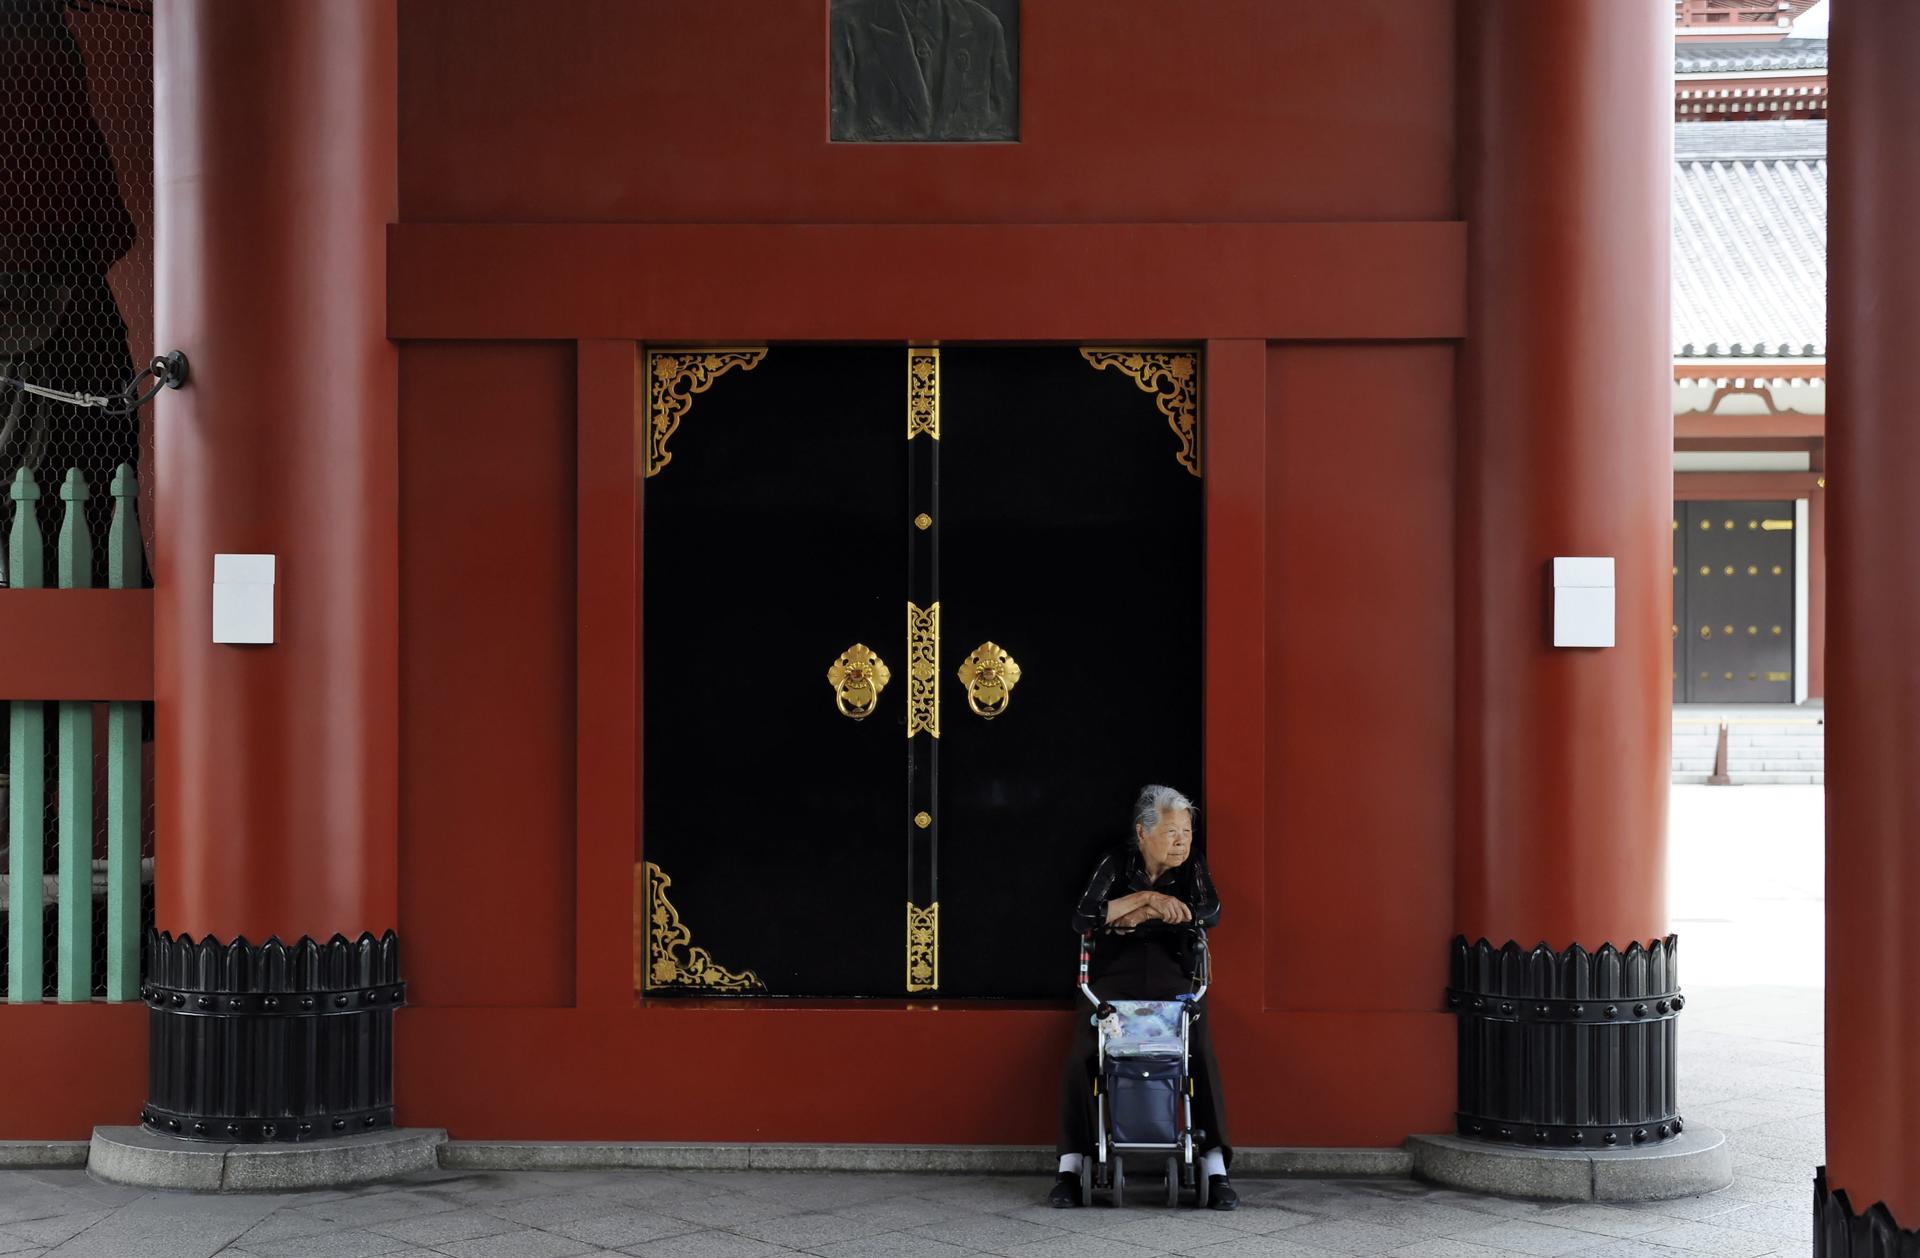 An elderly woman takes a break in the shadow of a large gate at the Sensoji temple in Tokyo's Asakusa district, Japan, 24 June 2011.EPA-EFE FILE/FRANCK ROBICHON